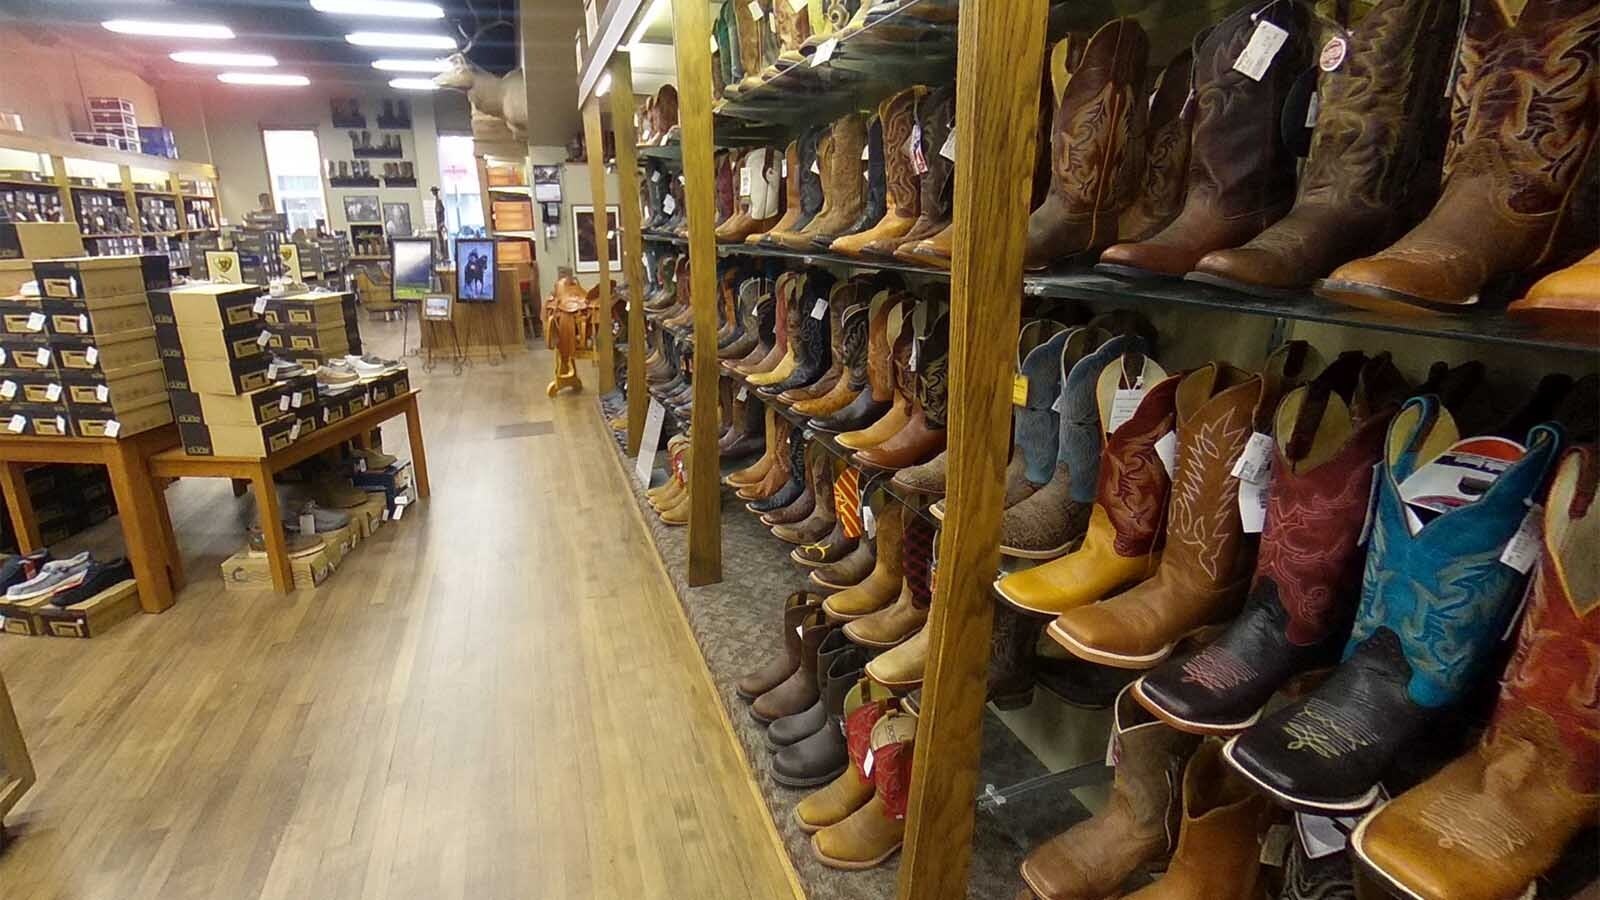 Boots as far as the eye can see.